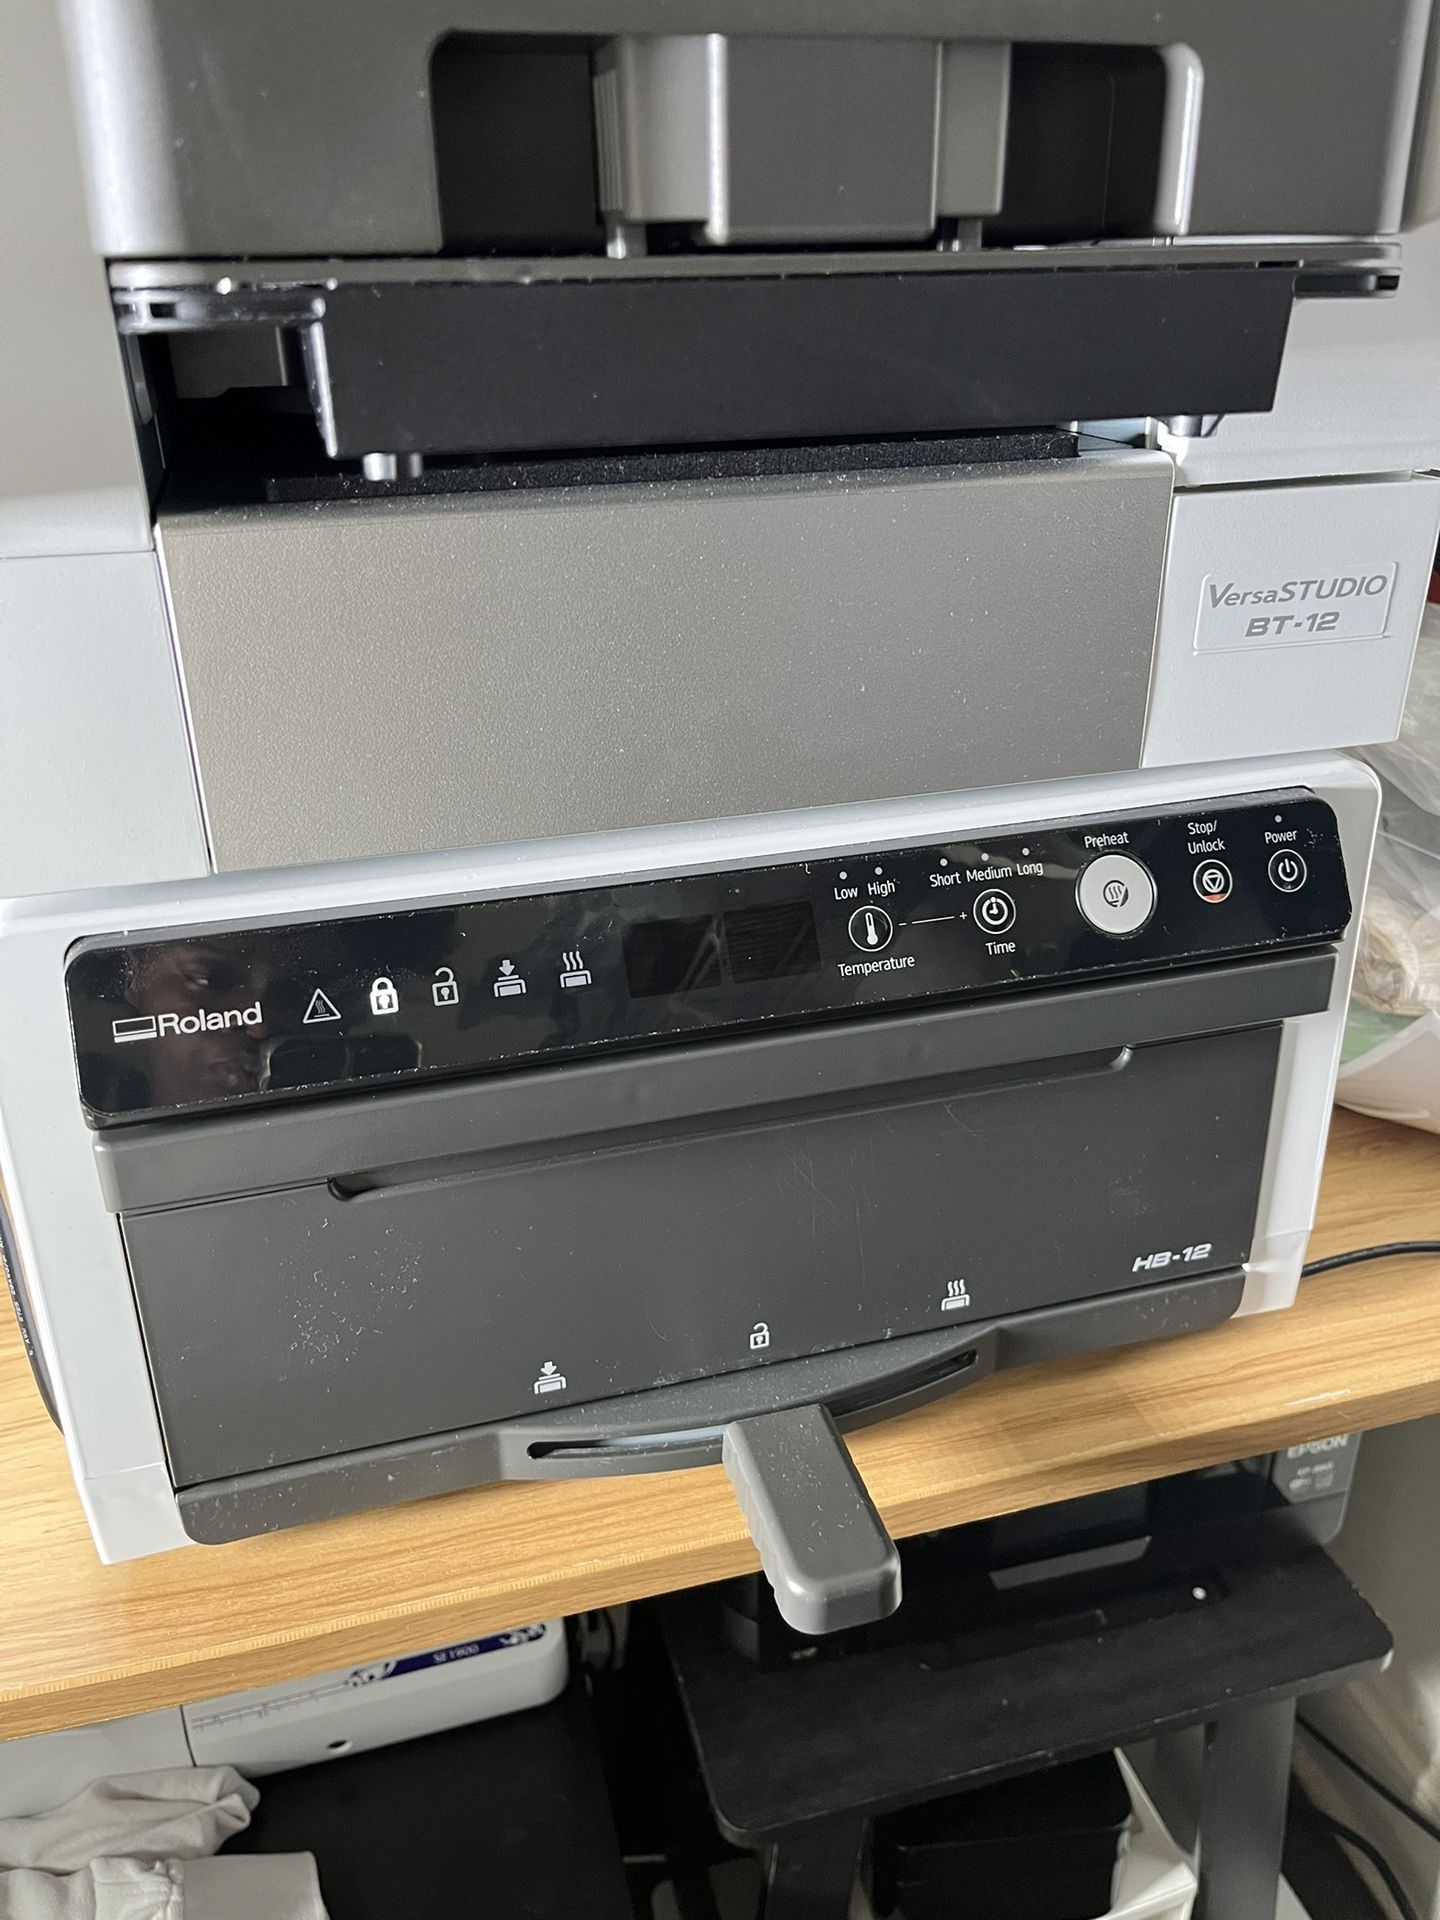 Roland DTG printer with additional tray and all original items